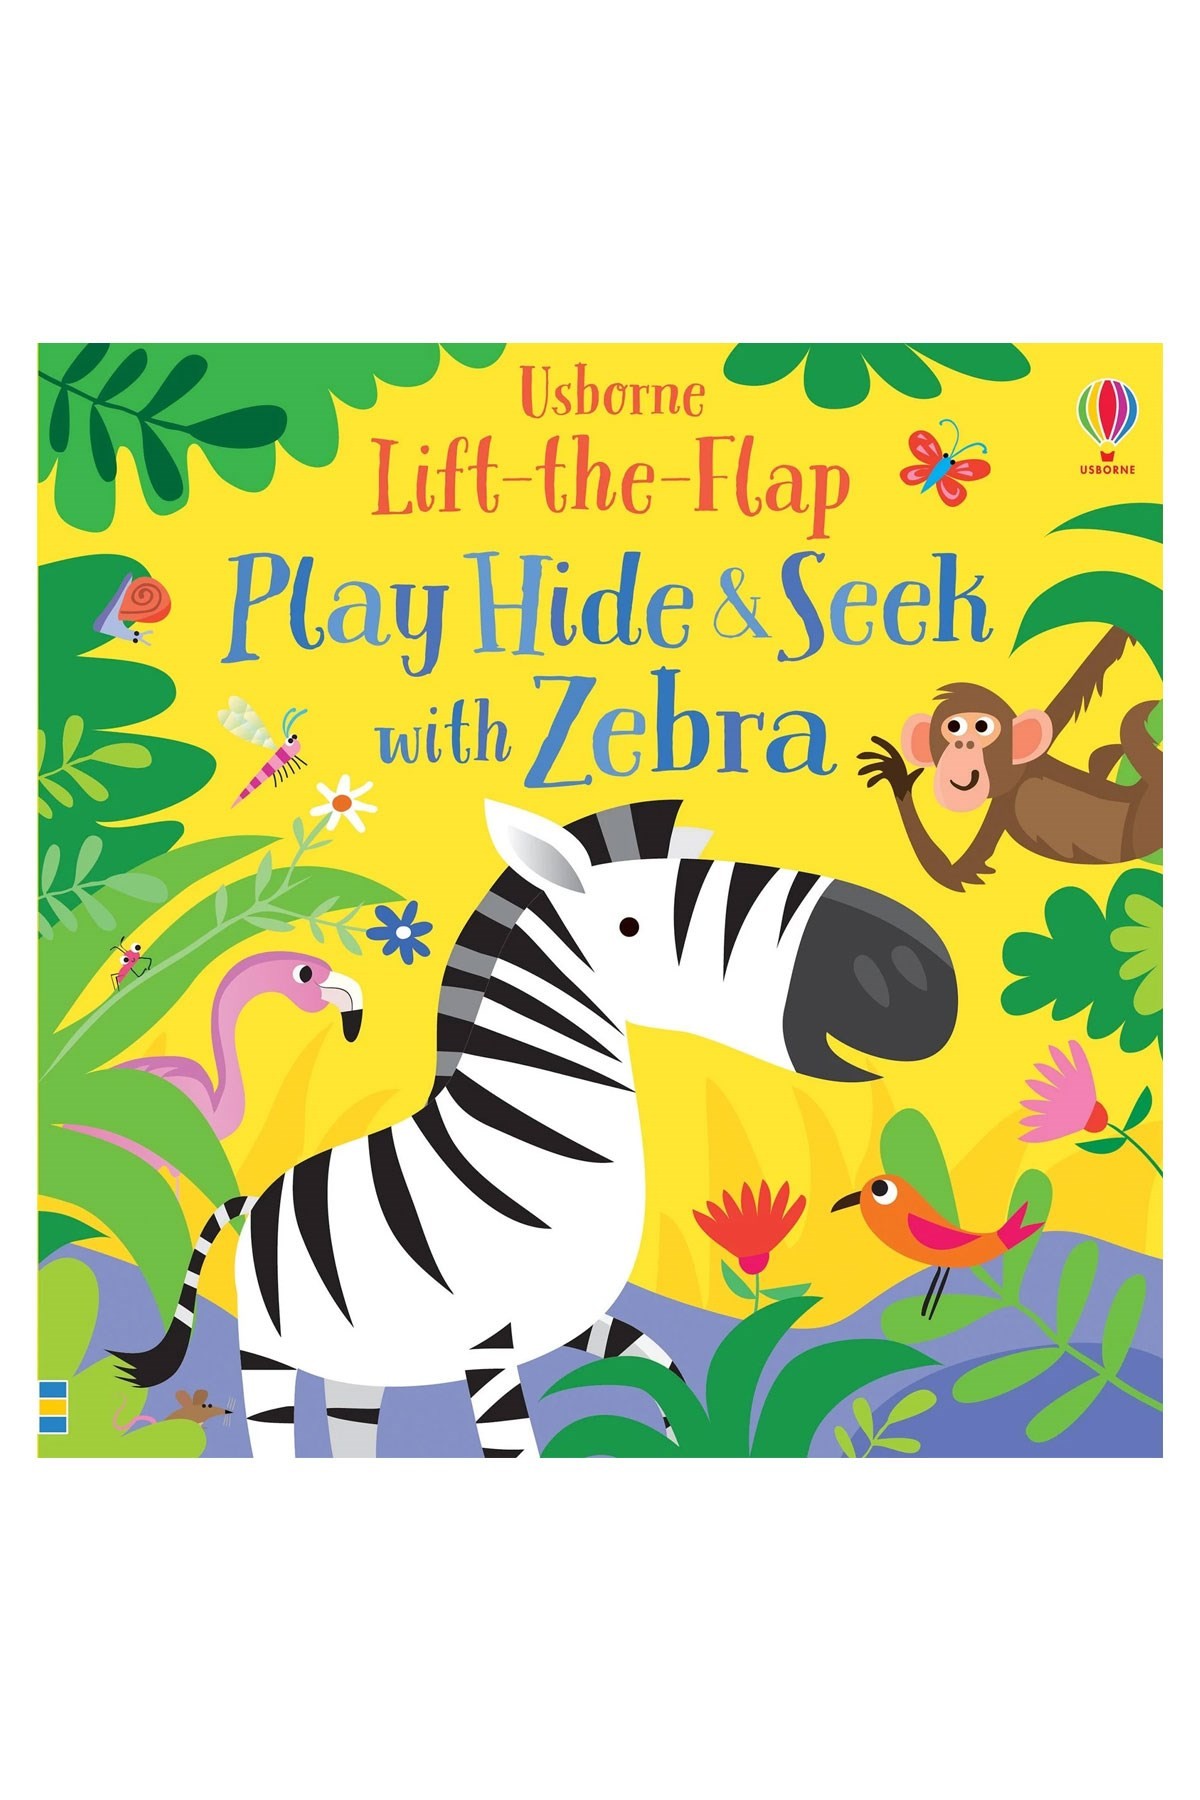 The Usborne Play Hide and Seek with Zebra